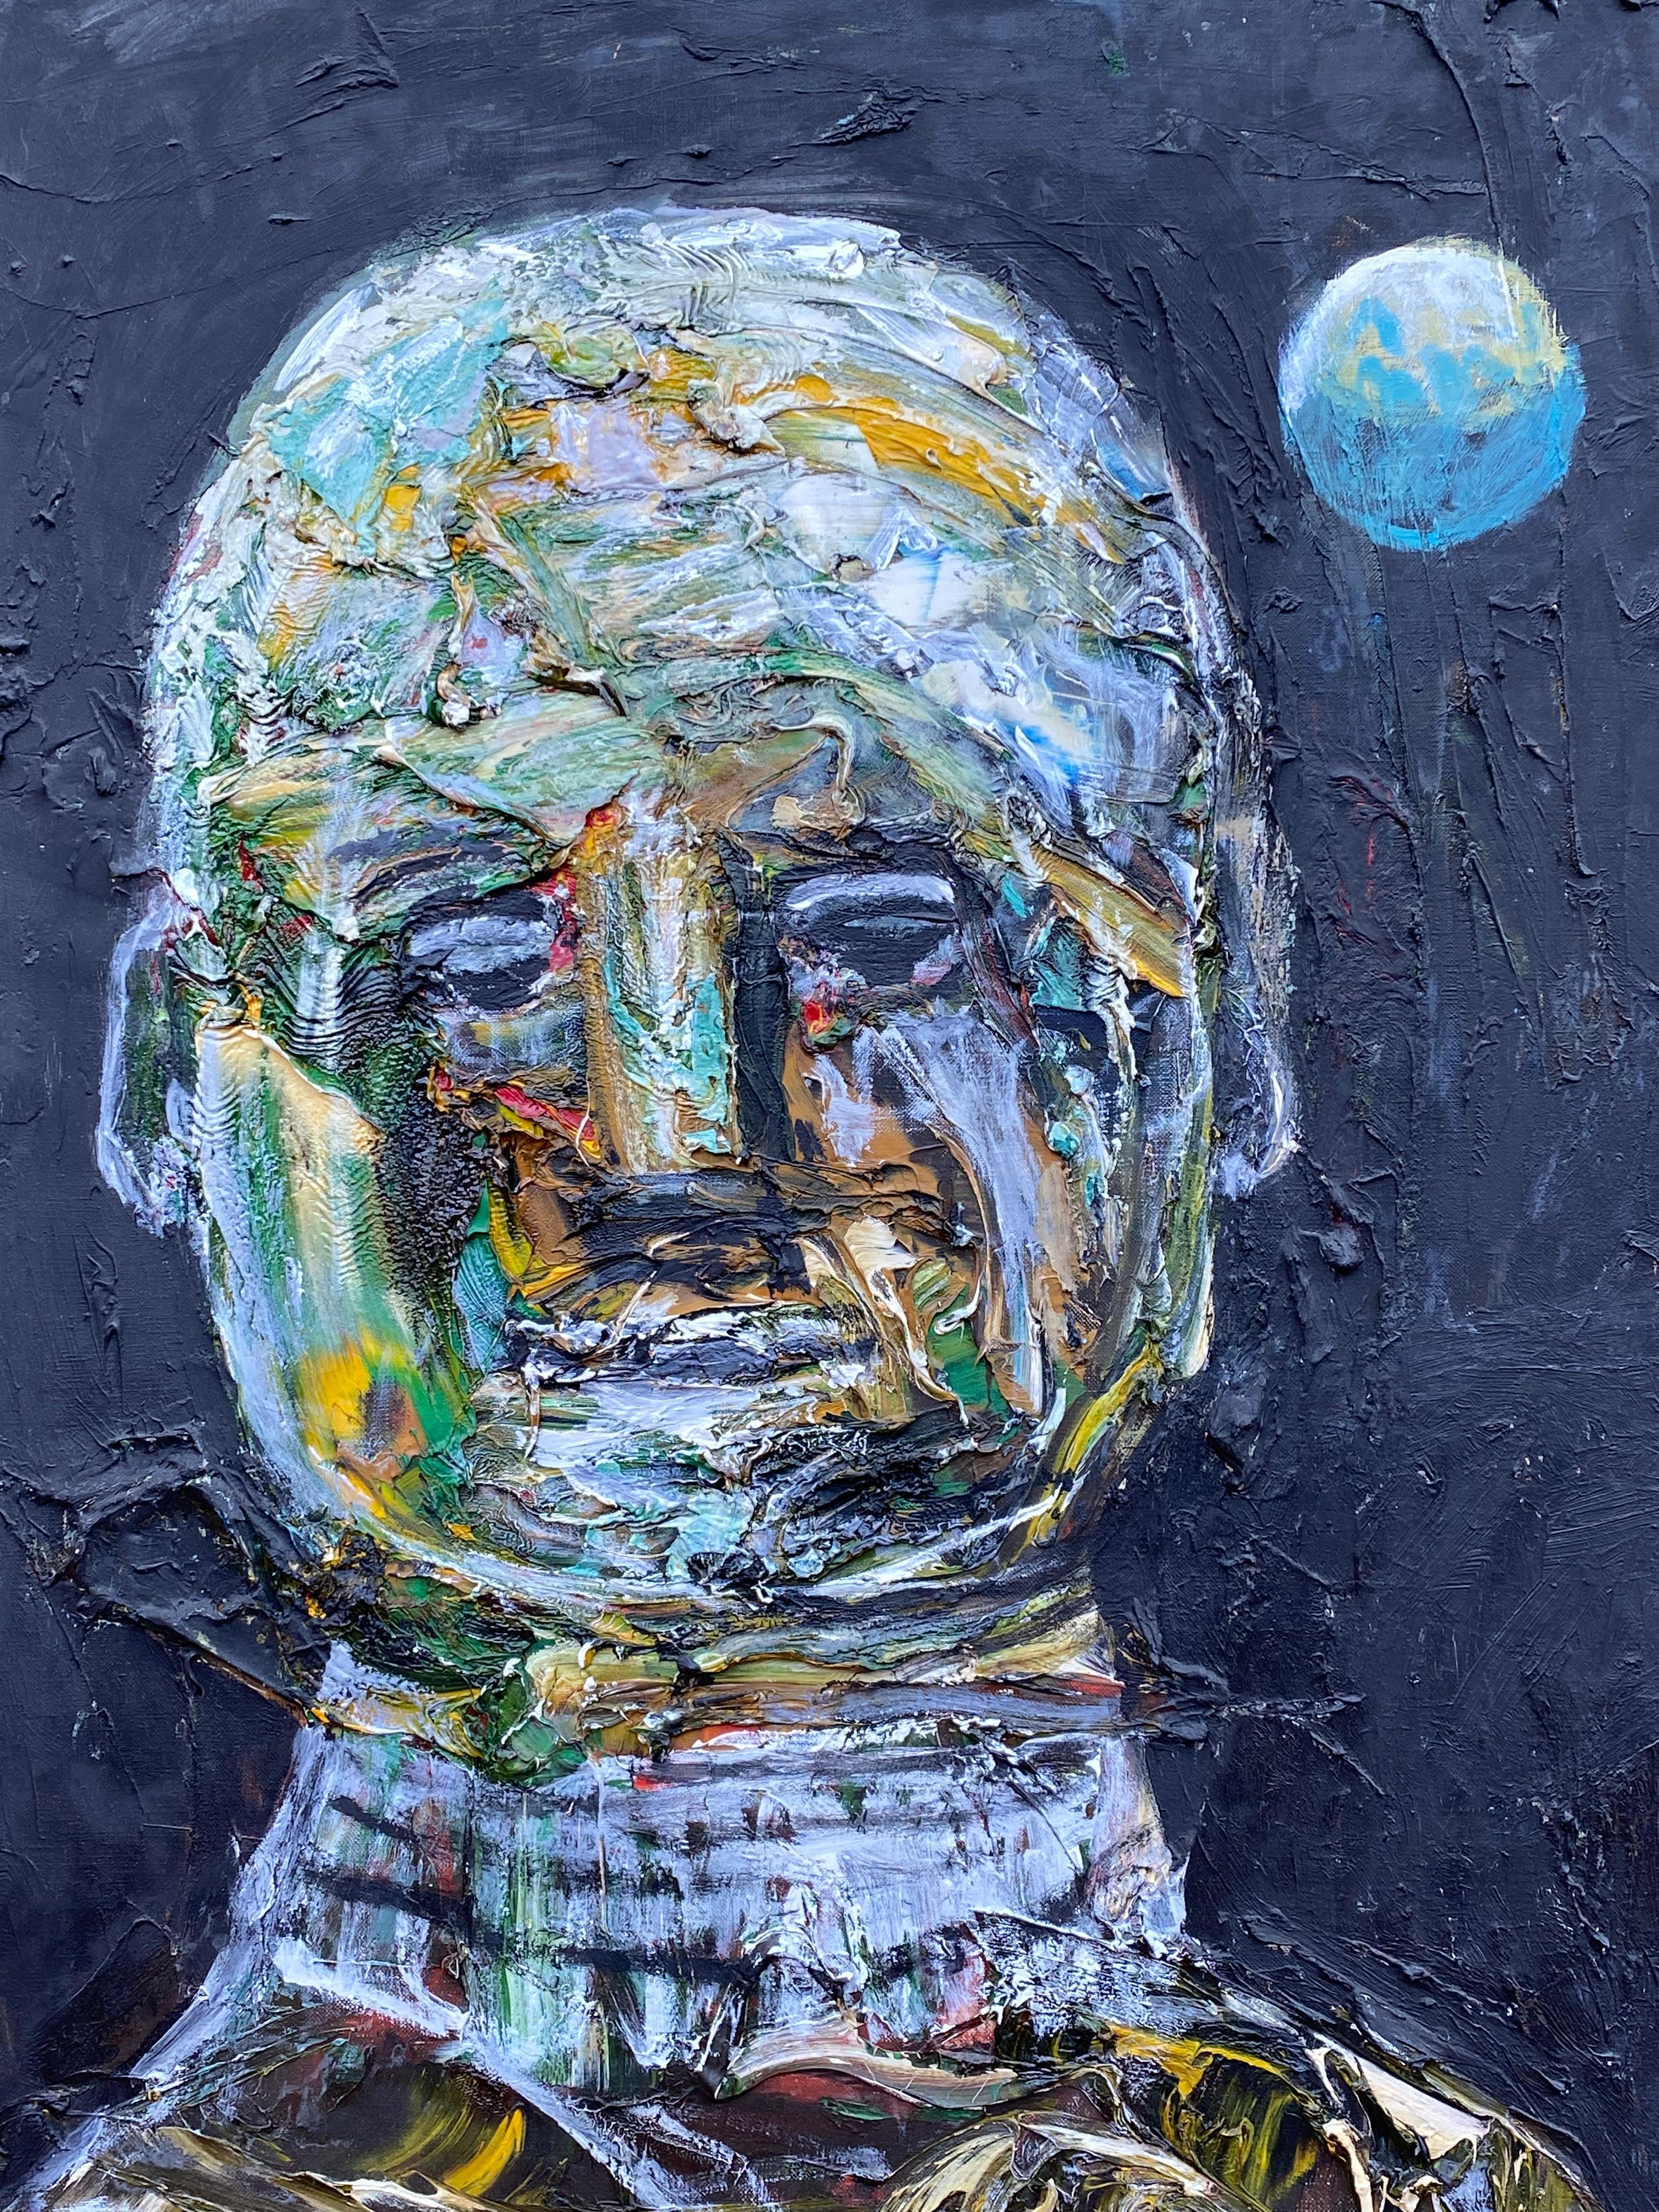 Man and the Moon - Painting by Nahum Tschacbasov